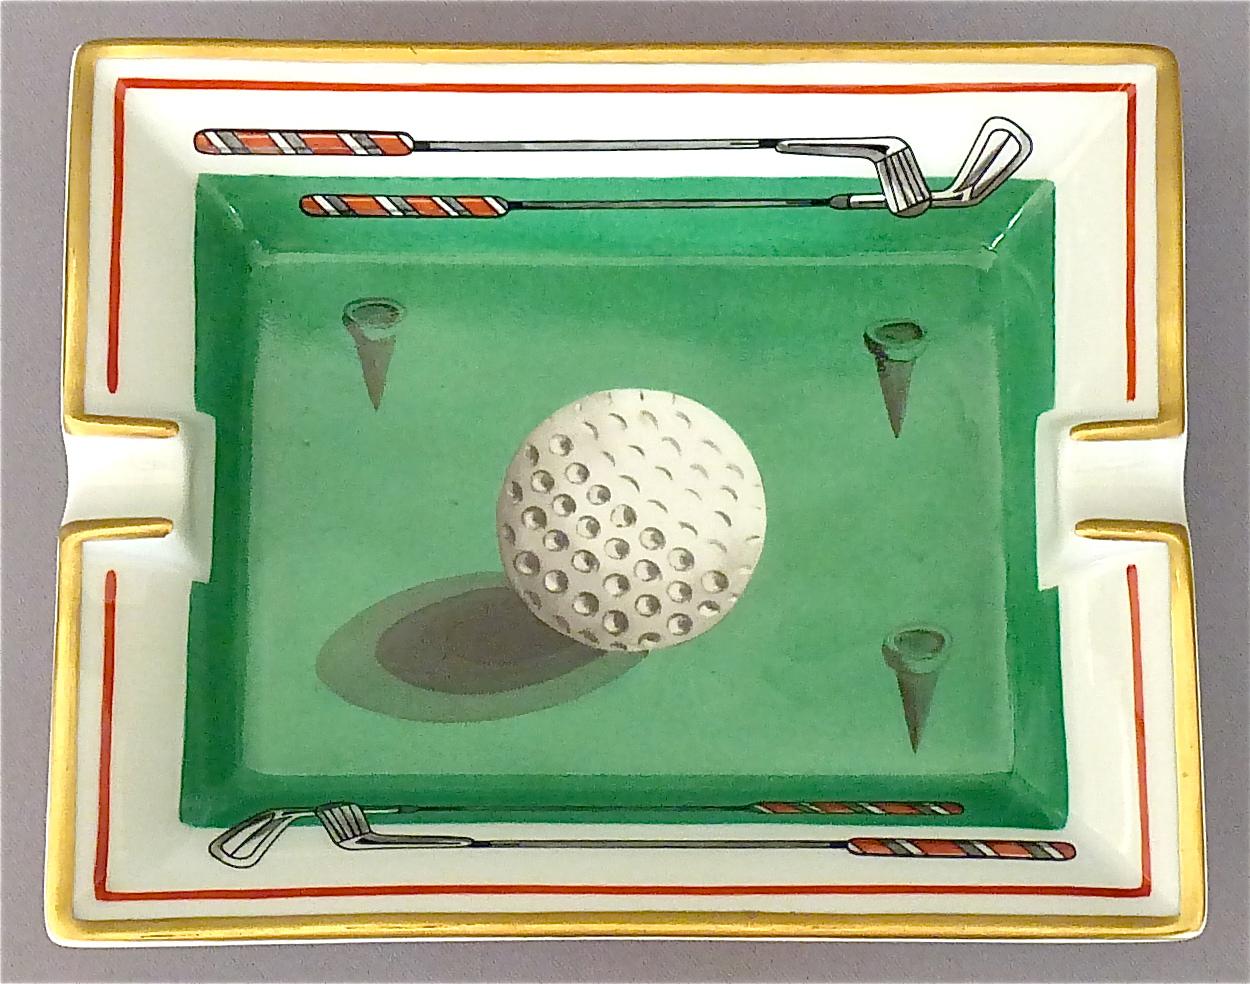 A fine and beautiful Hermès Limoges vintage oblong porcelain ashtray with golf ball motif in Fornasetti style, partly gilt, in colors green, white, grey and red. Marked Hermes Paris and Made in France to the side and suede covered to the base for